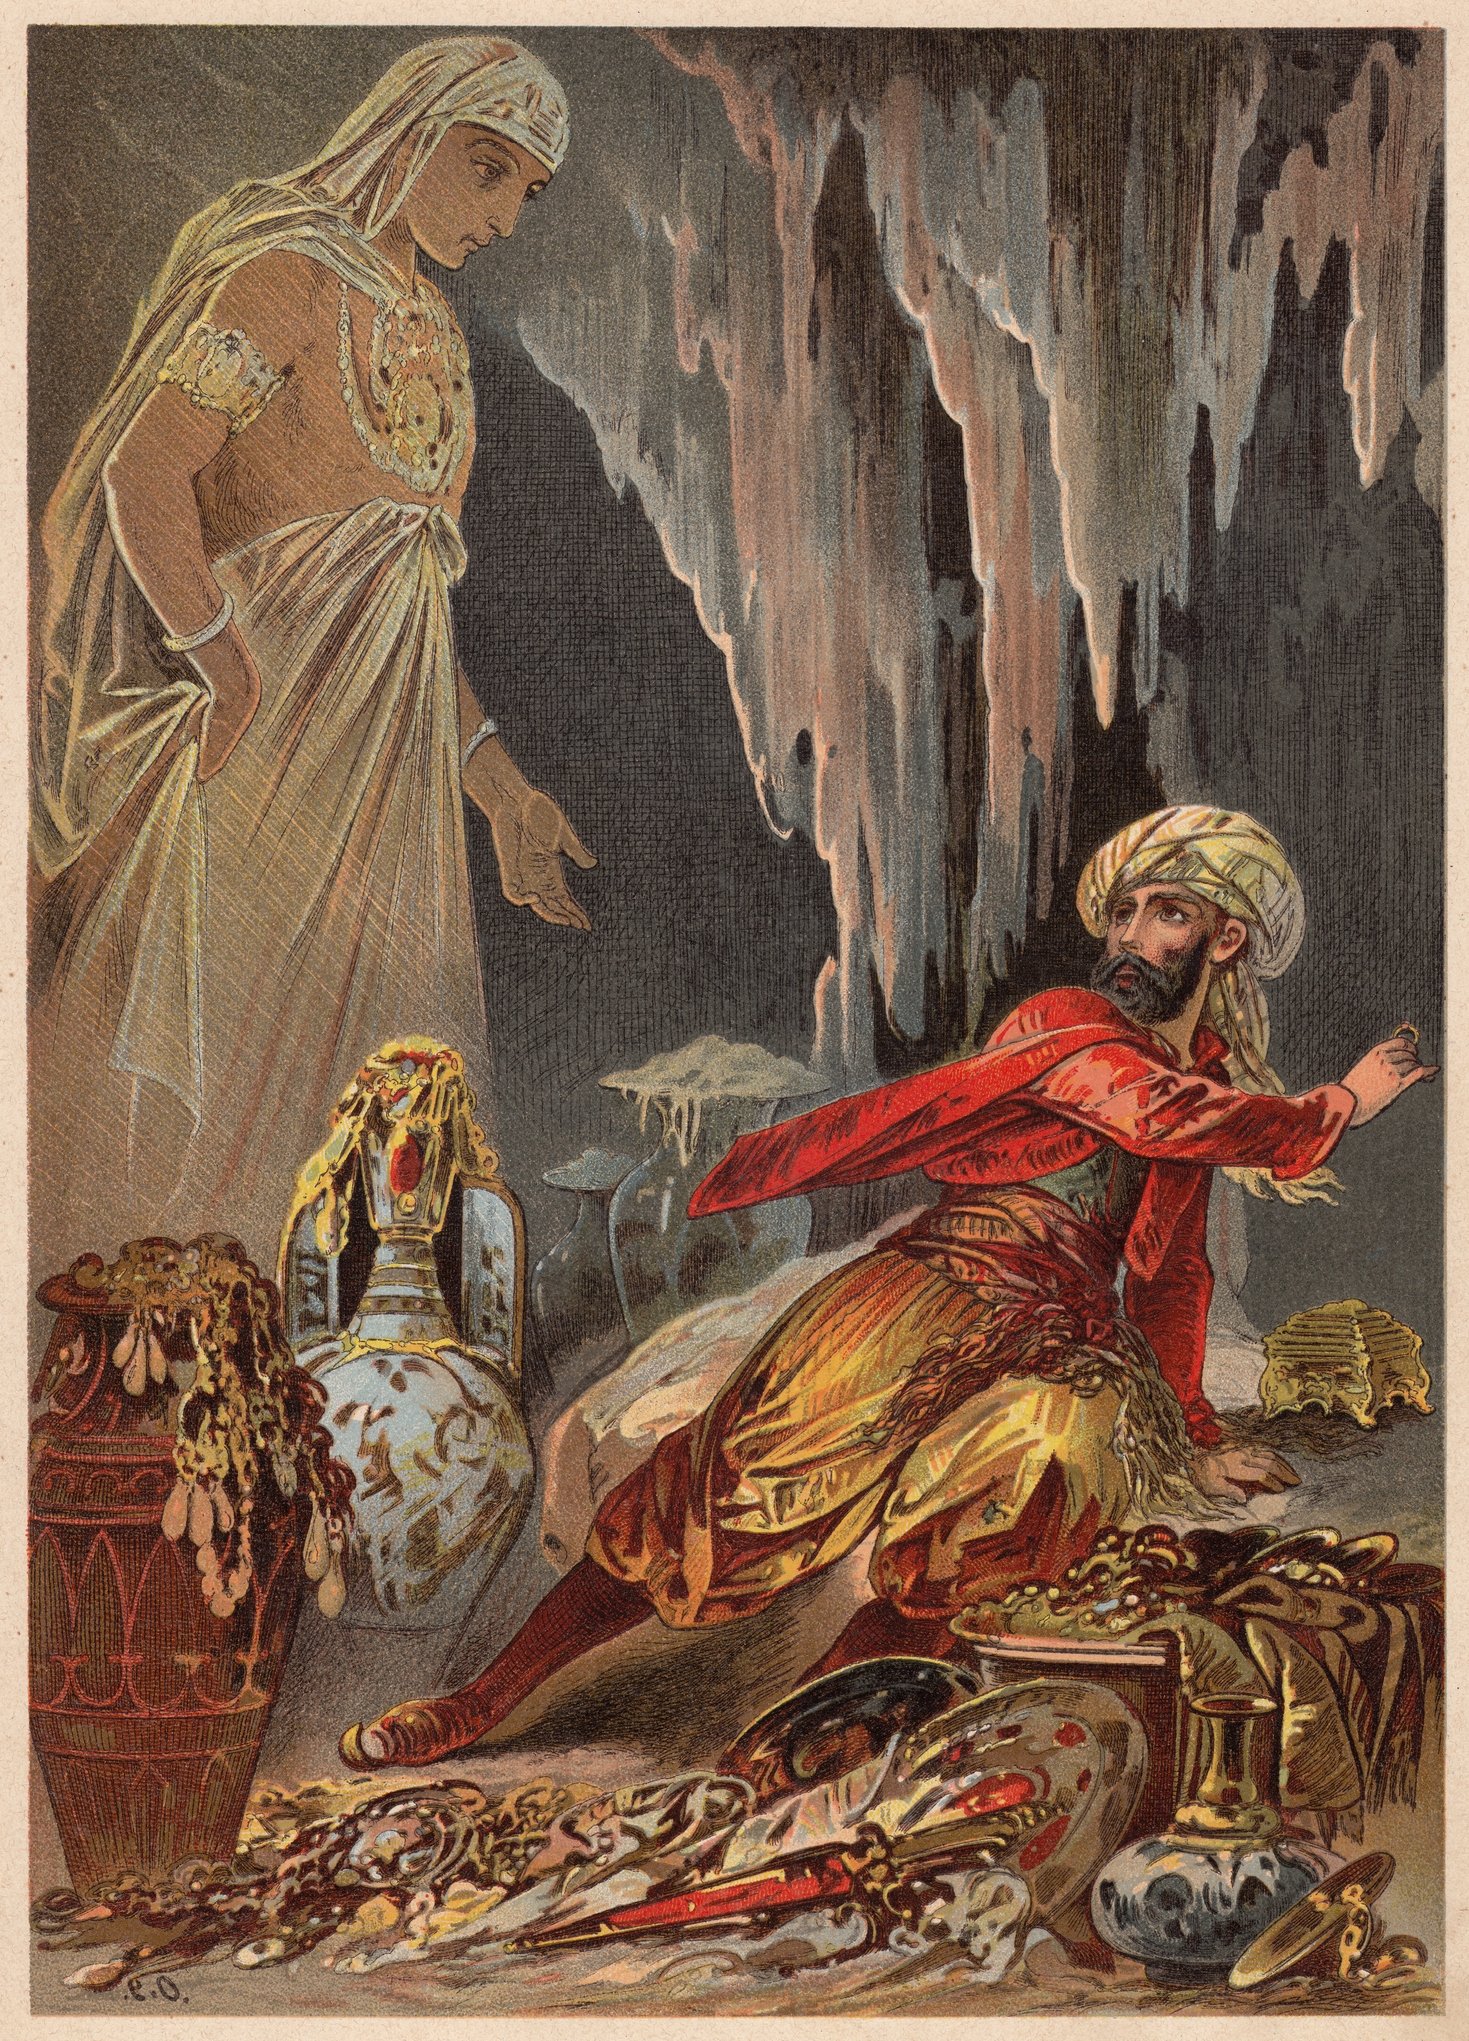 Lithograph after a drawing by German painter Carl Offterdinger depicting a scene from 'Maruf the Cobbler', a fairy tale from 'One Thousand and One Nights'. (iStock Photo)